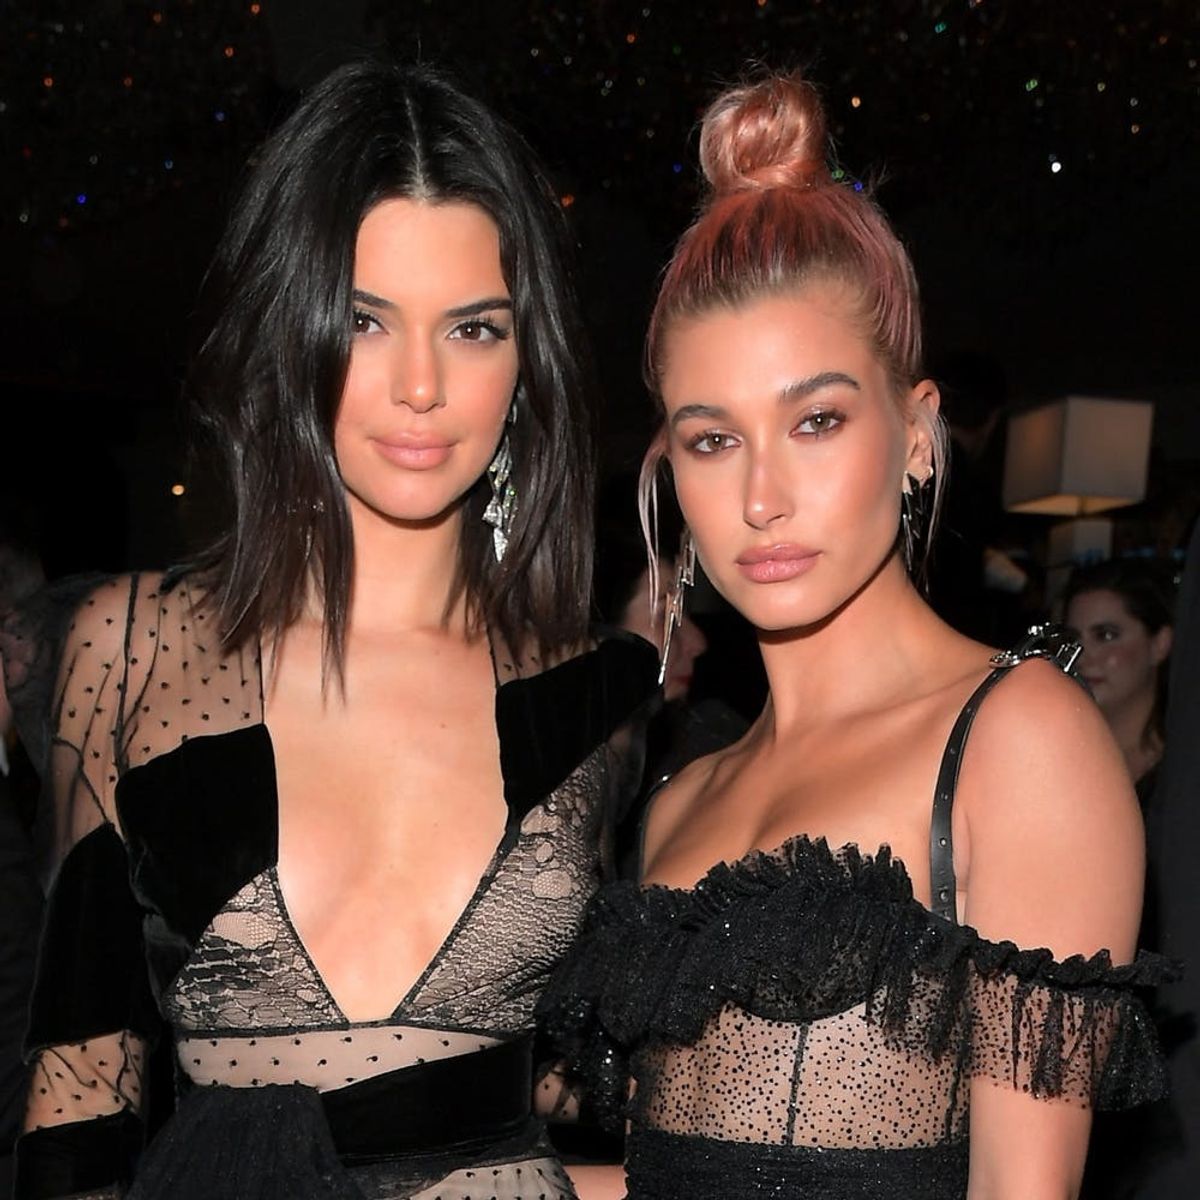 Kendall Jenner Reacts to Justin Bieber and Hailey Baldwin’s Engagement